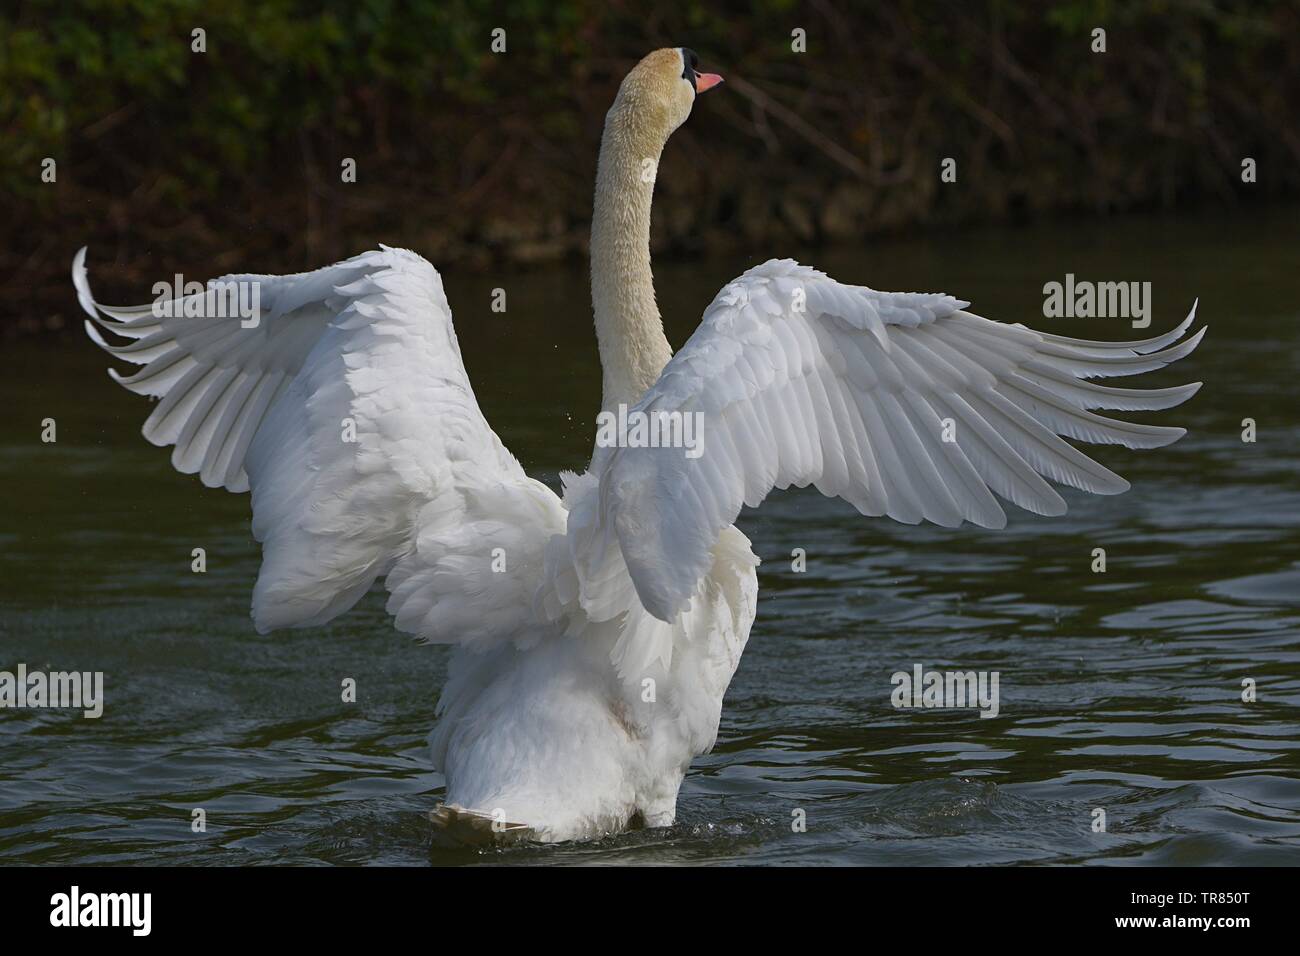 Swan with outstretched wings Stock Photo